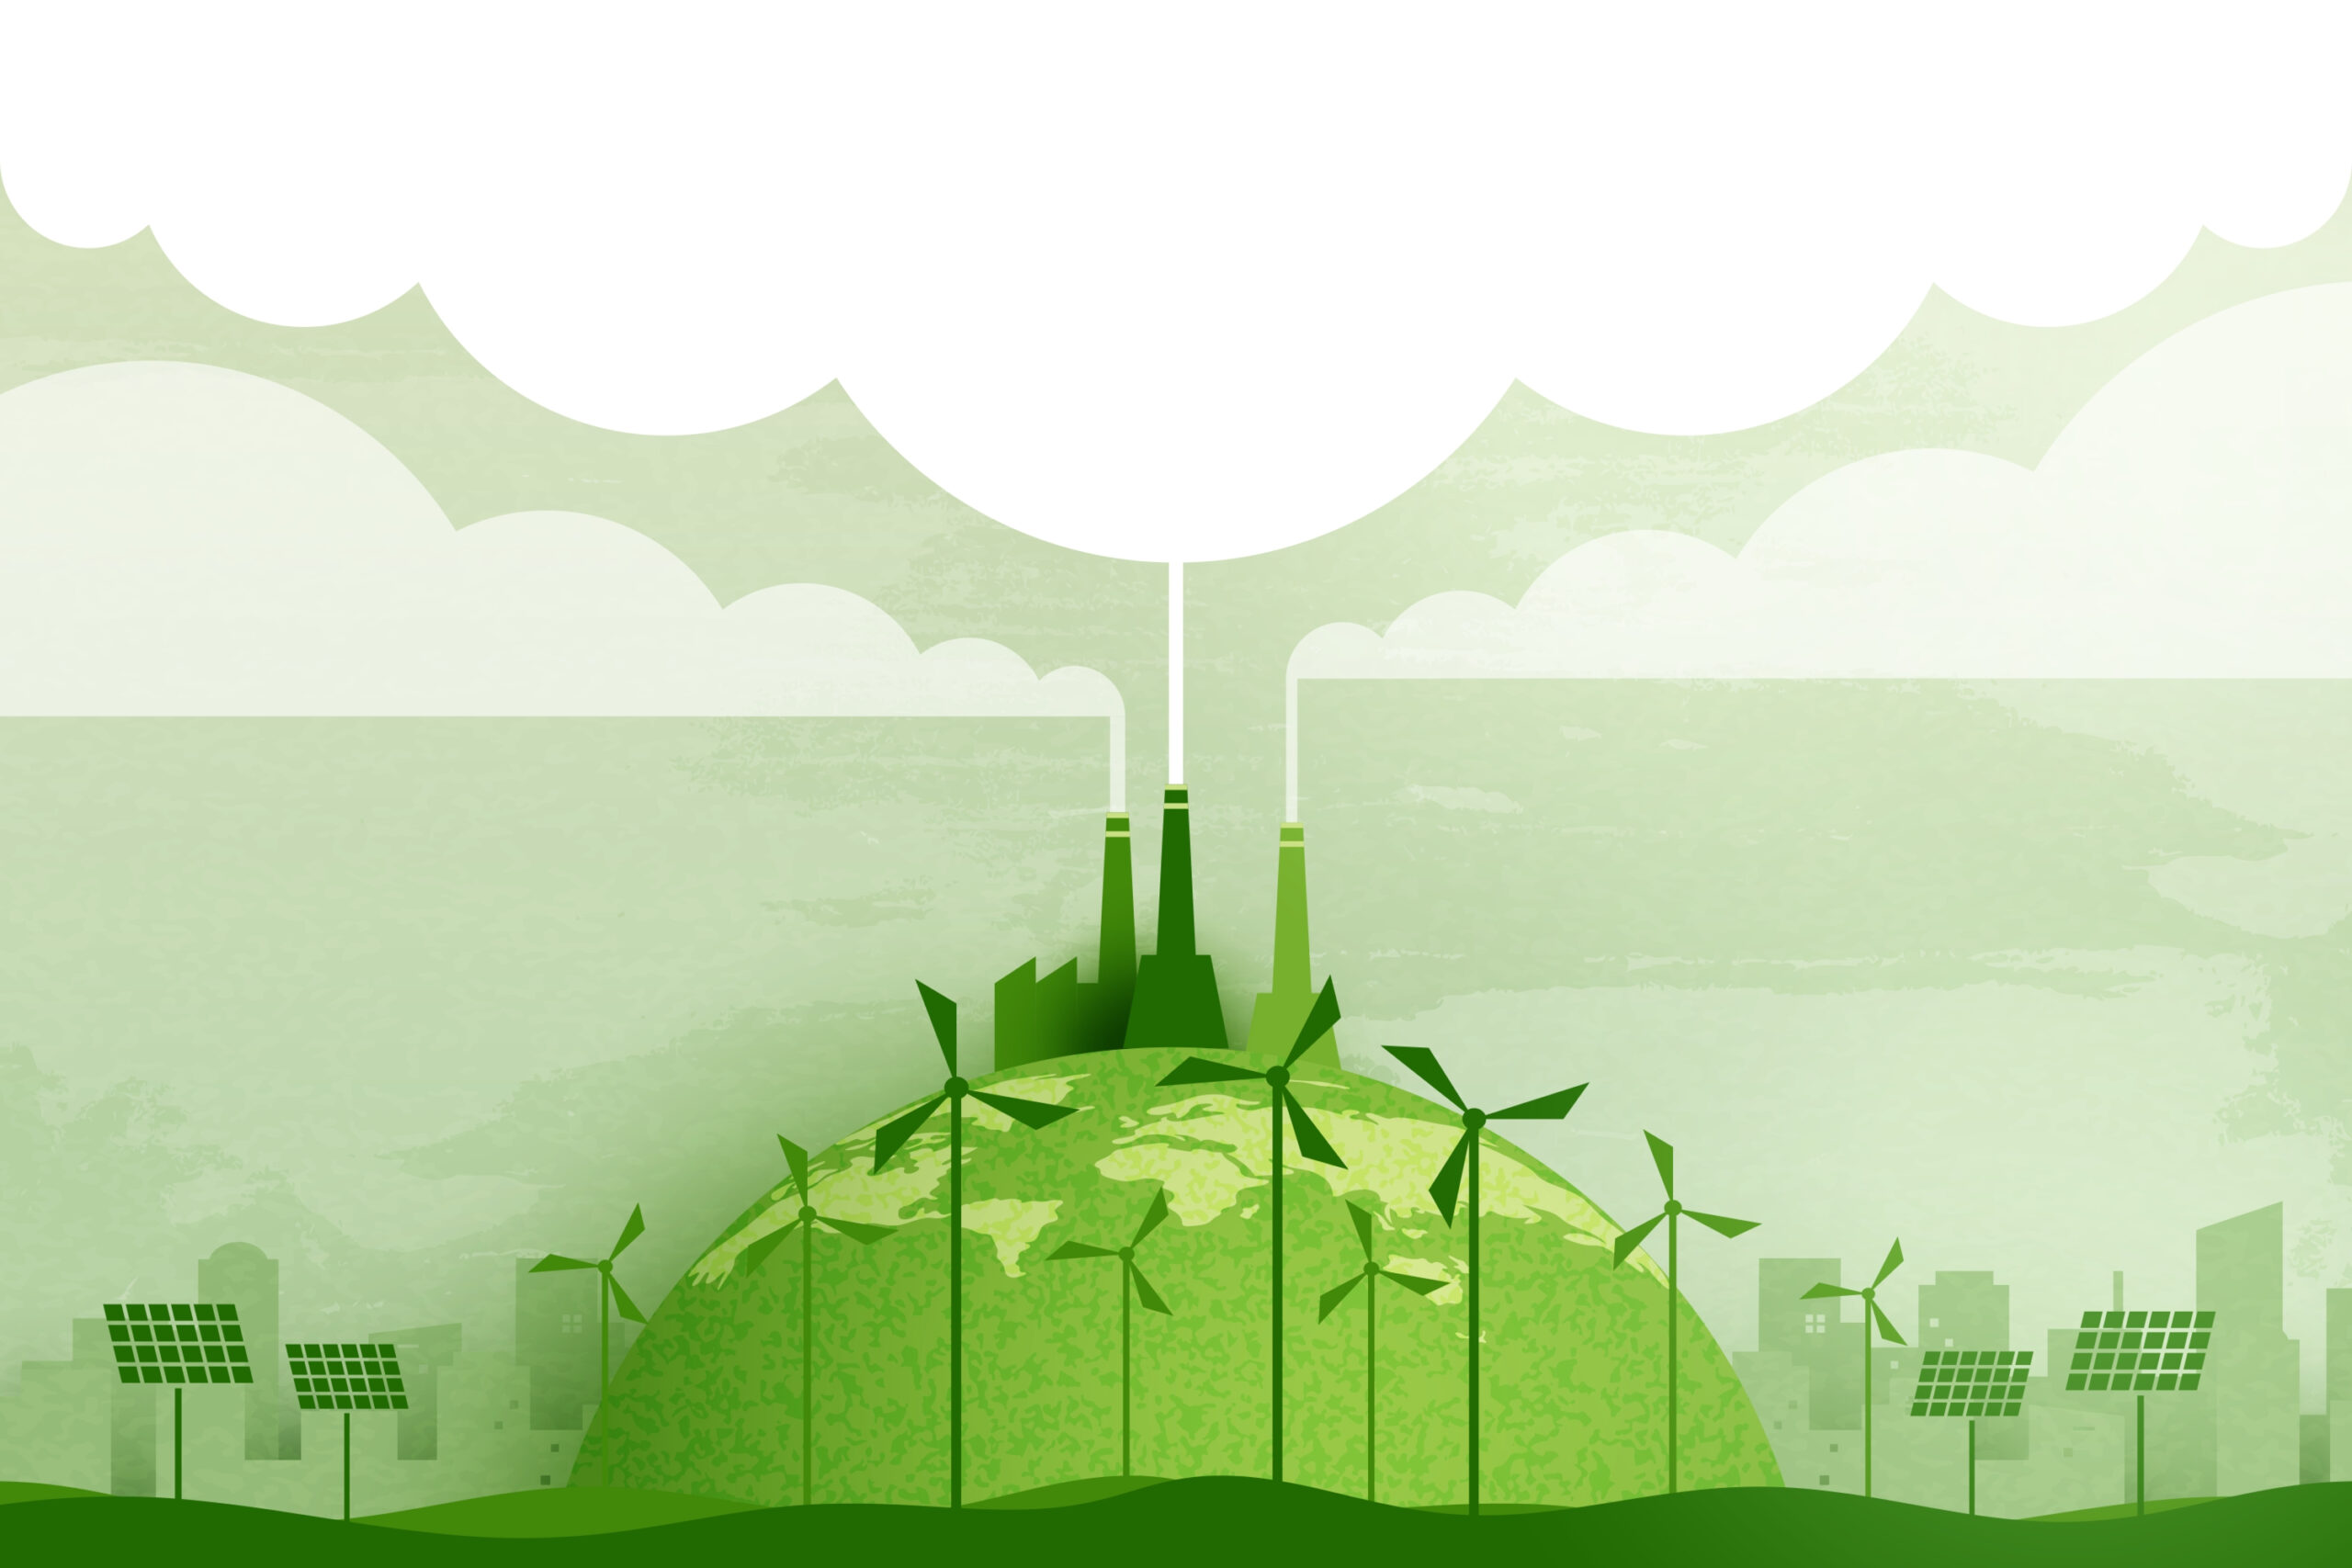 illustration of paper art of ecology and environment with wind turbines, solar panels and green colored earth in background